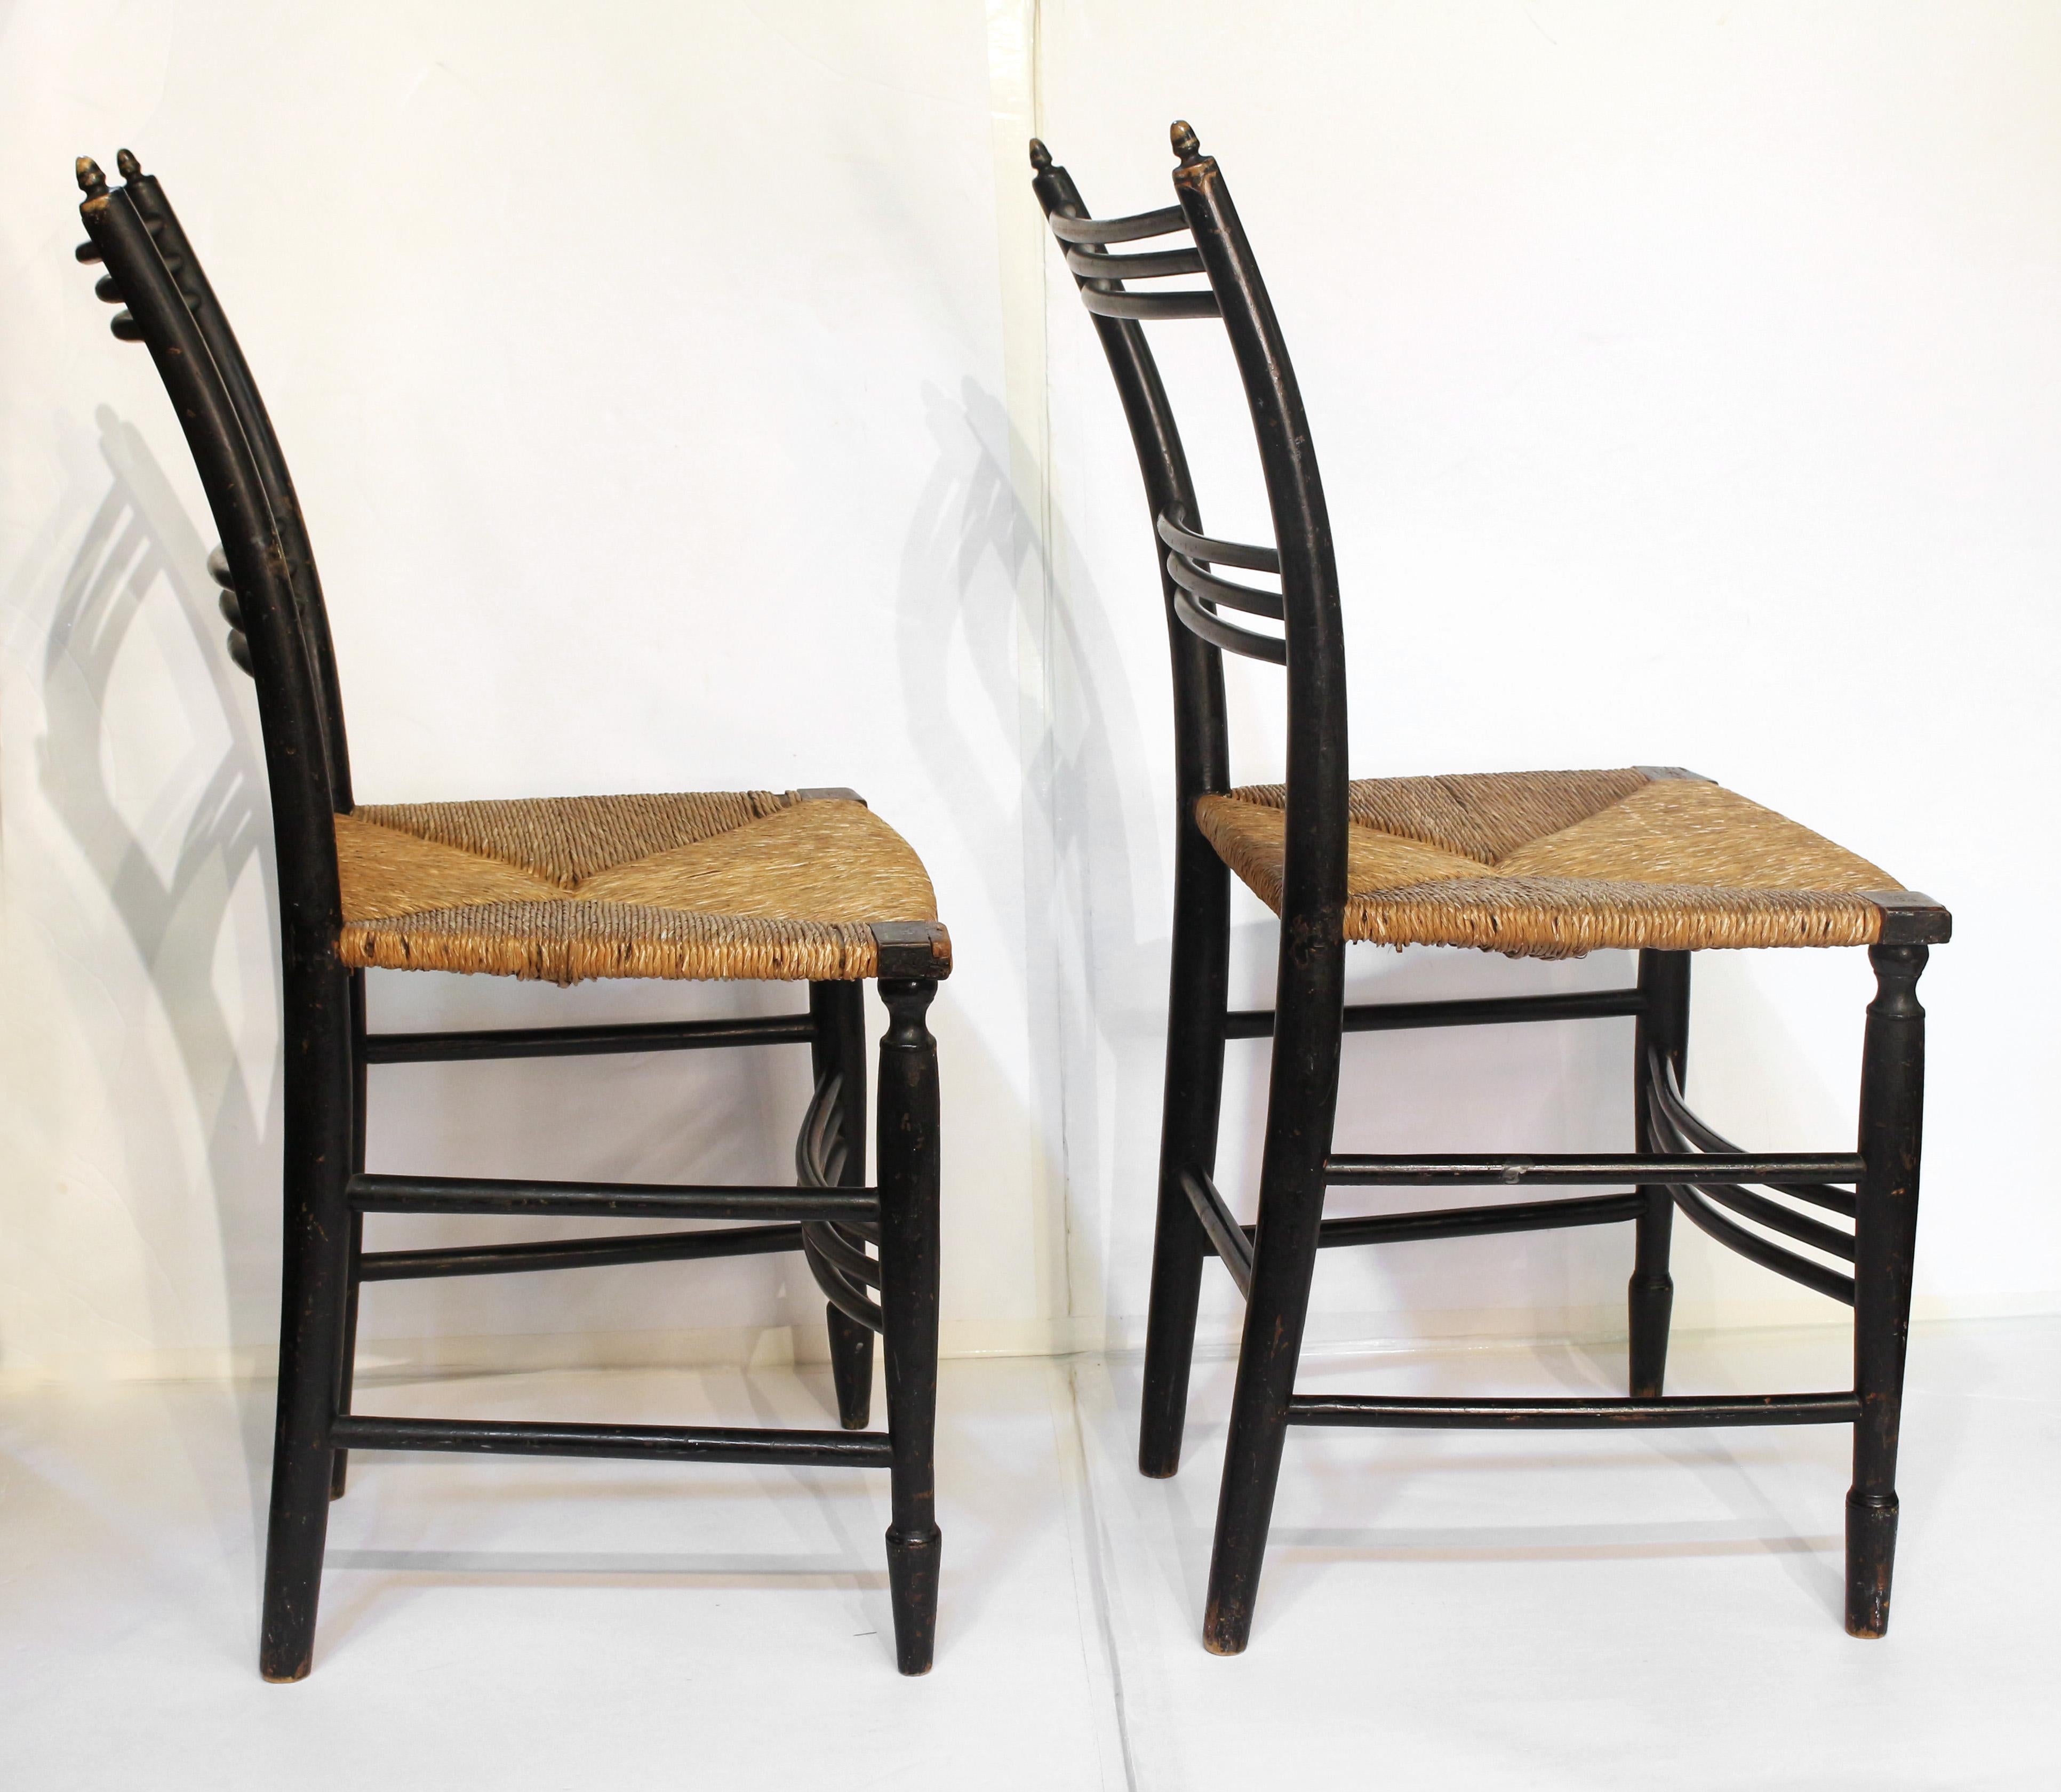 Pair of American rush seat side chairs, circa 1810-1820. Faux bamboo carved wood with black paint & gold highlights throughout. Acorn finials & concave triple front stretchers. Turned tapered front legs with end swell. One front corner lock worn &